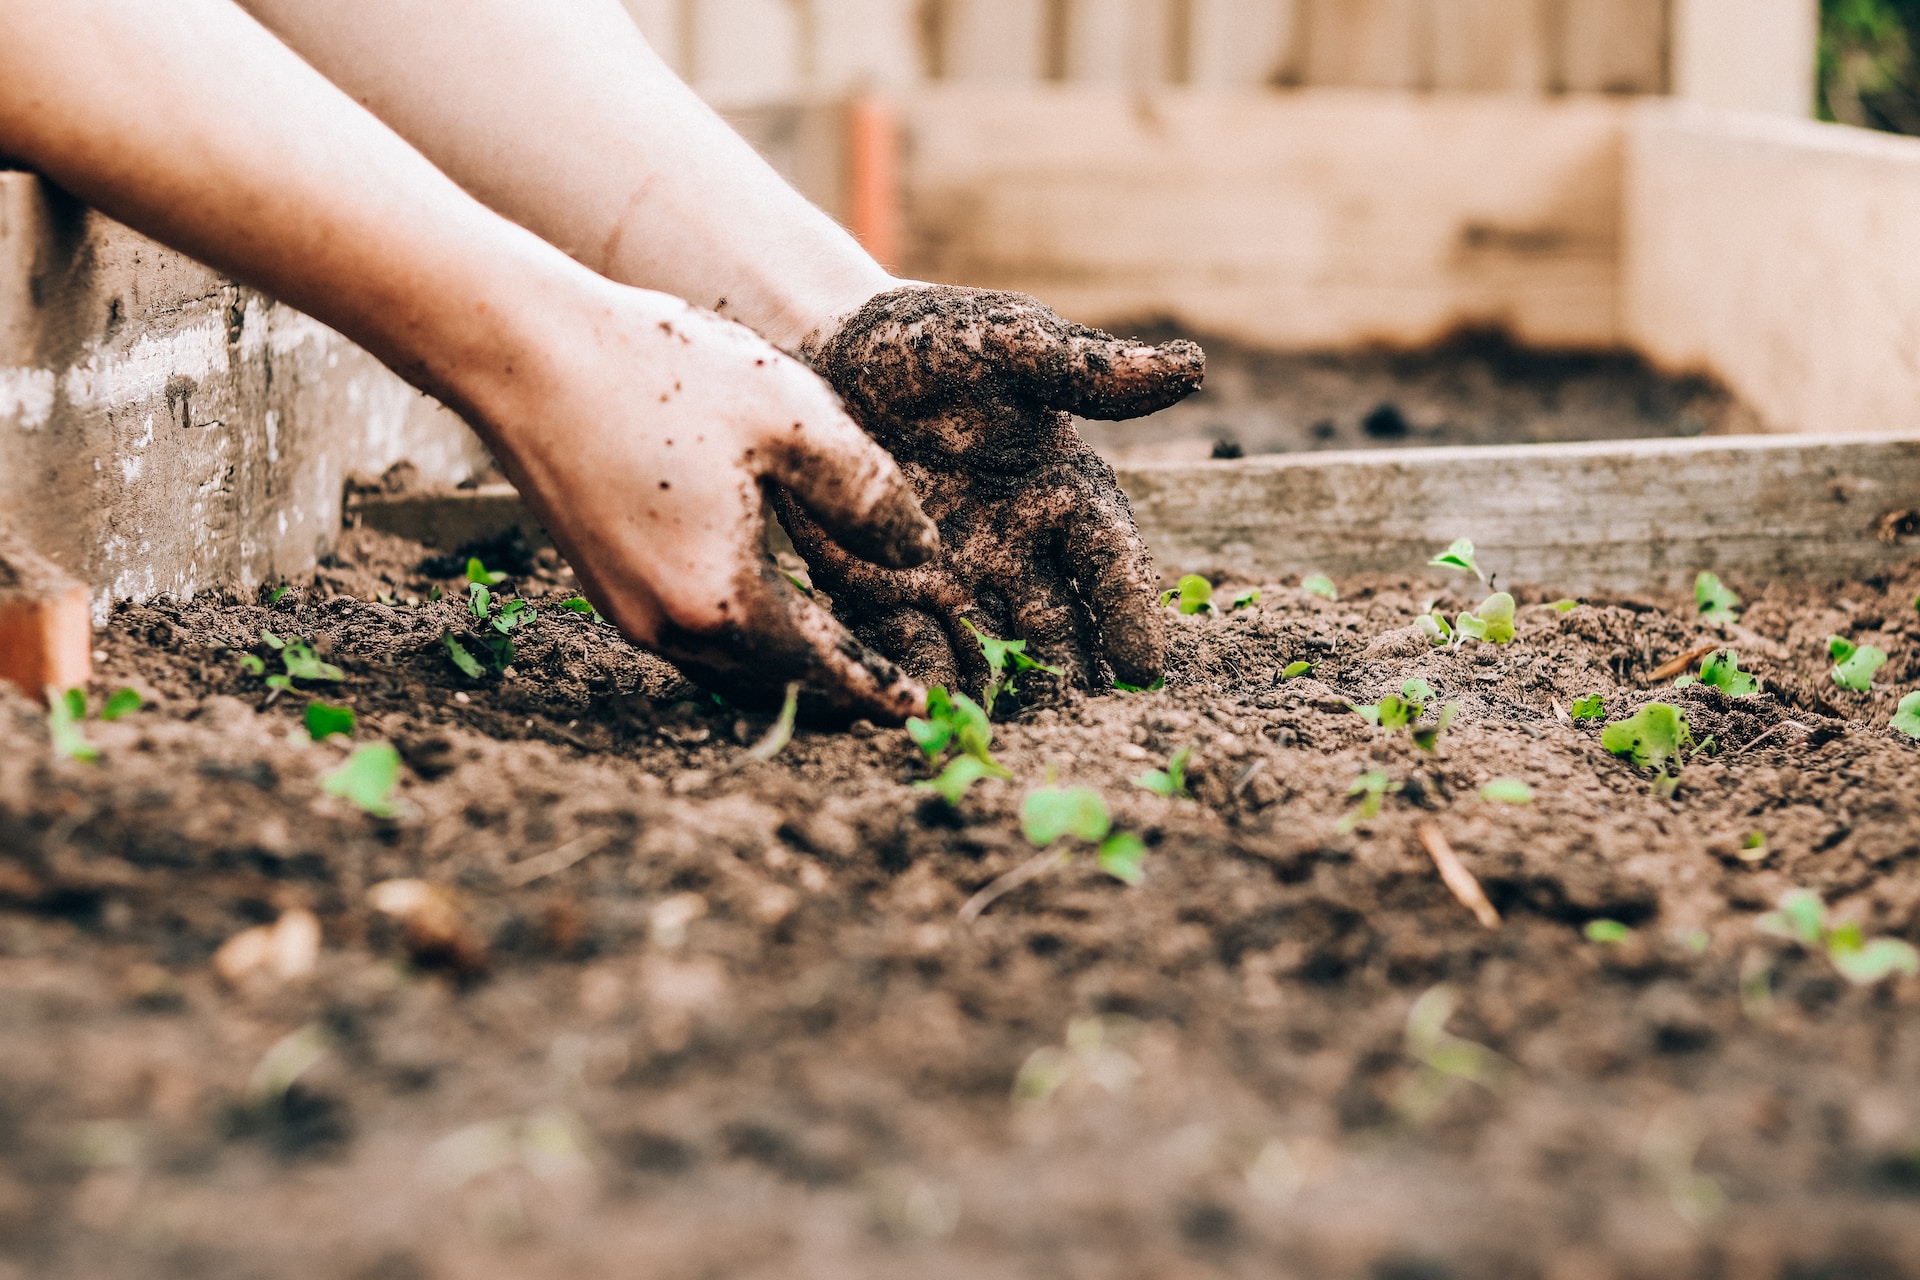 An up-close image of a person’s hands digging into a garden bed. The person’s hands are covered in soil and plant buds are starting to grow.